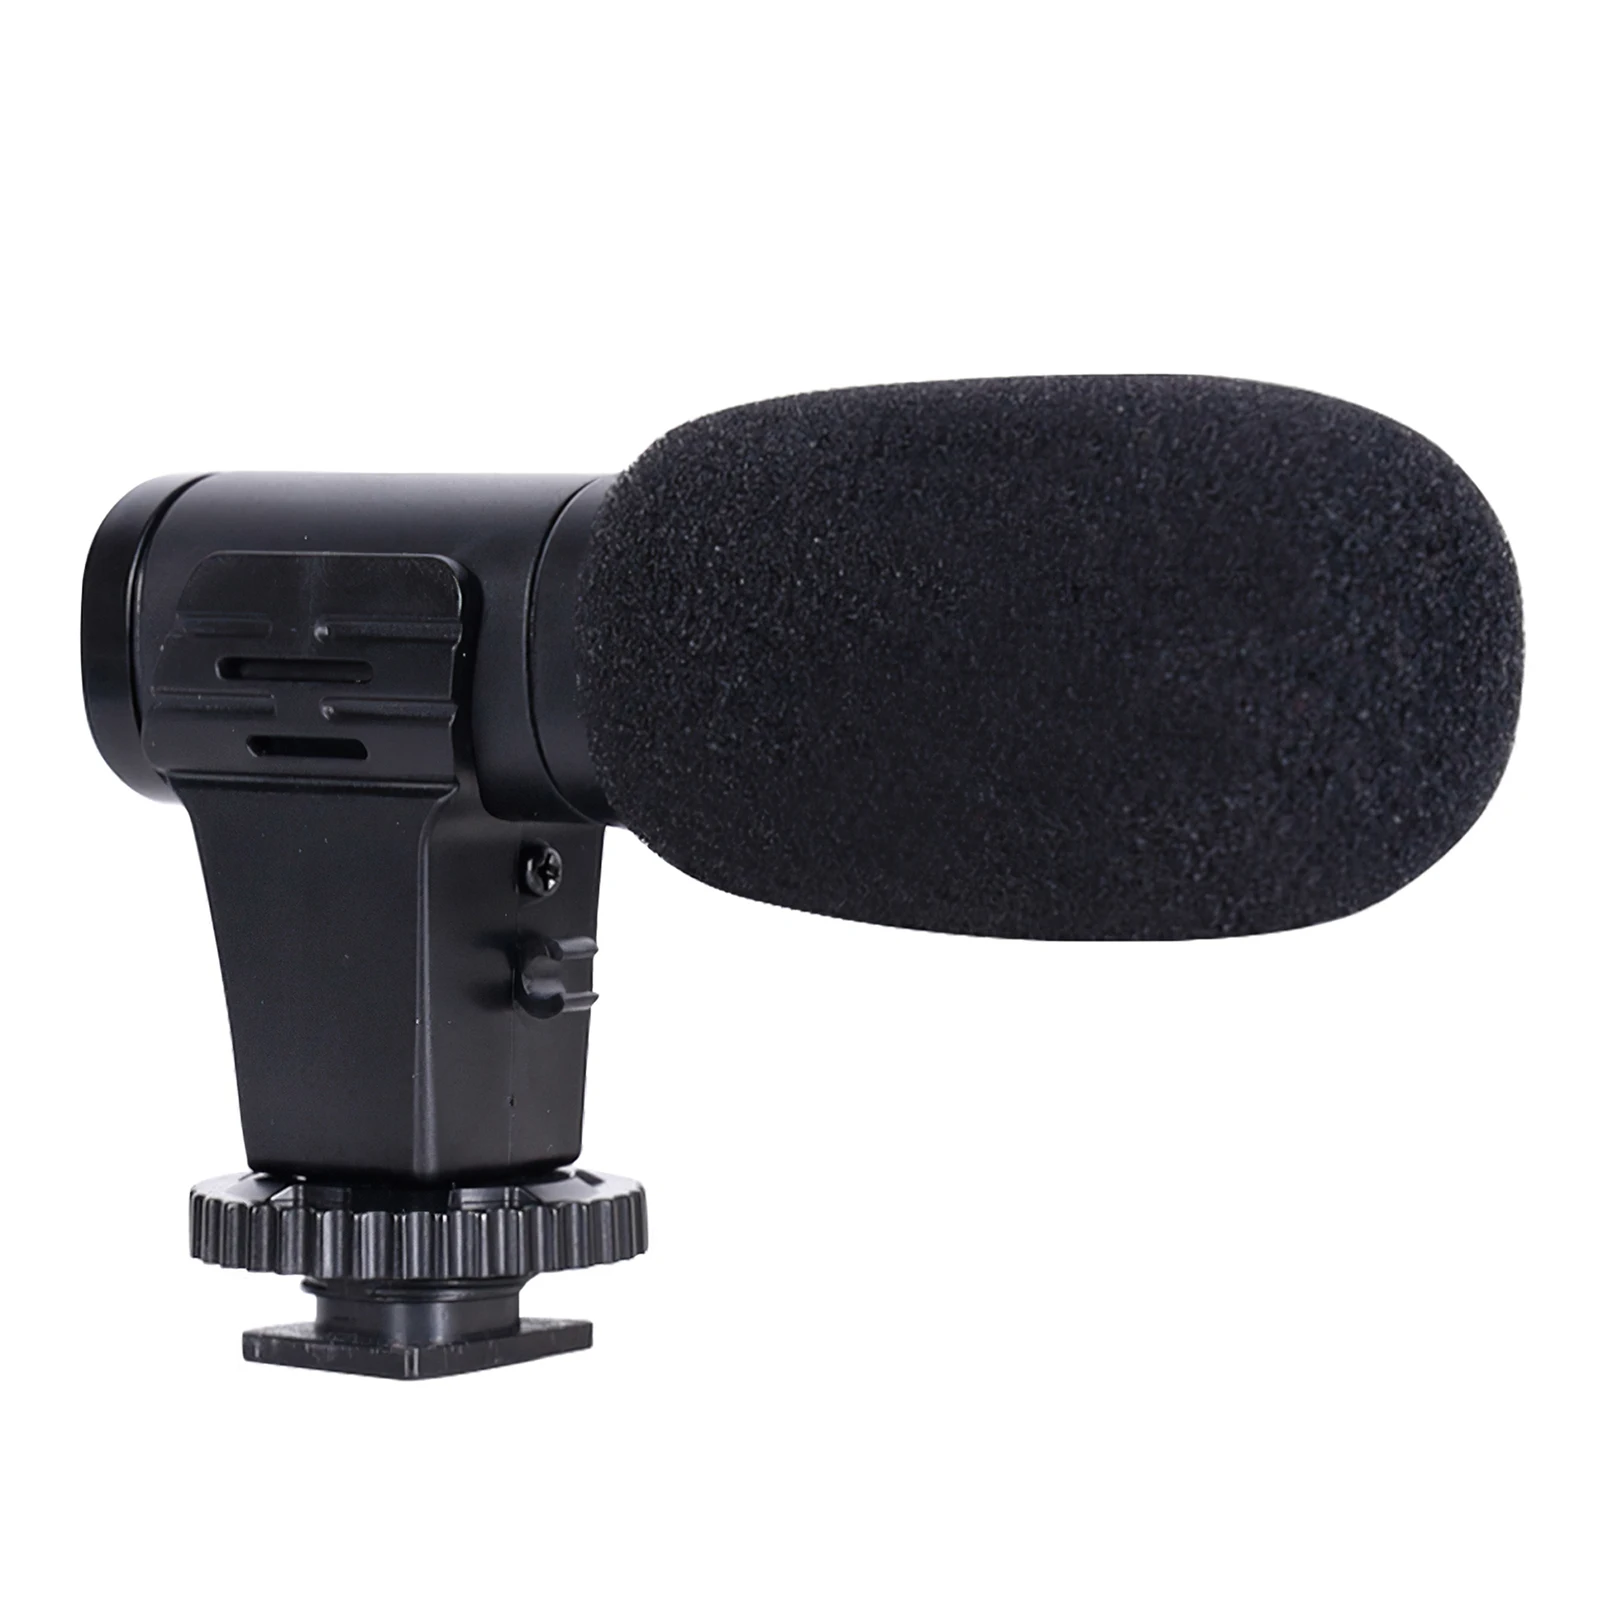 

AWIND Video Microphone On-Camera Mini Condenser Record Interview Vlog Mic for Phone DSLR Camera Microphone 3.5mm/0.14inch Microp